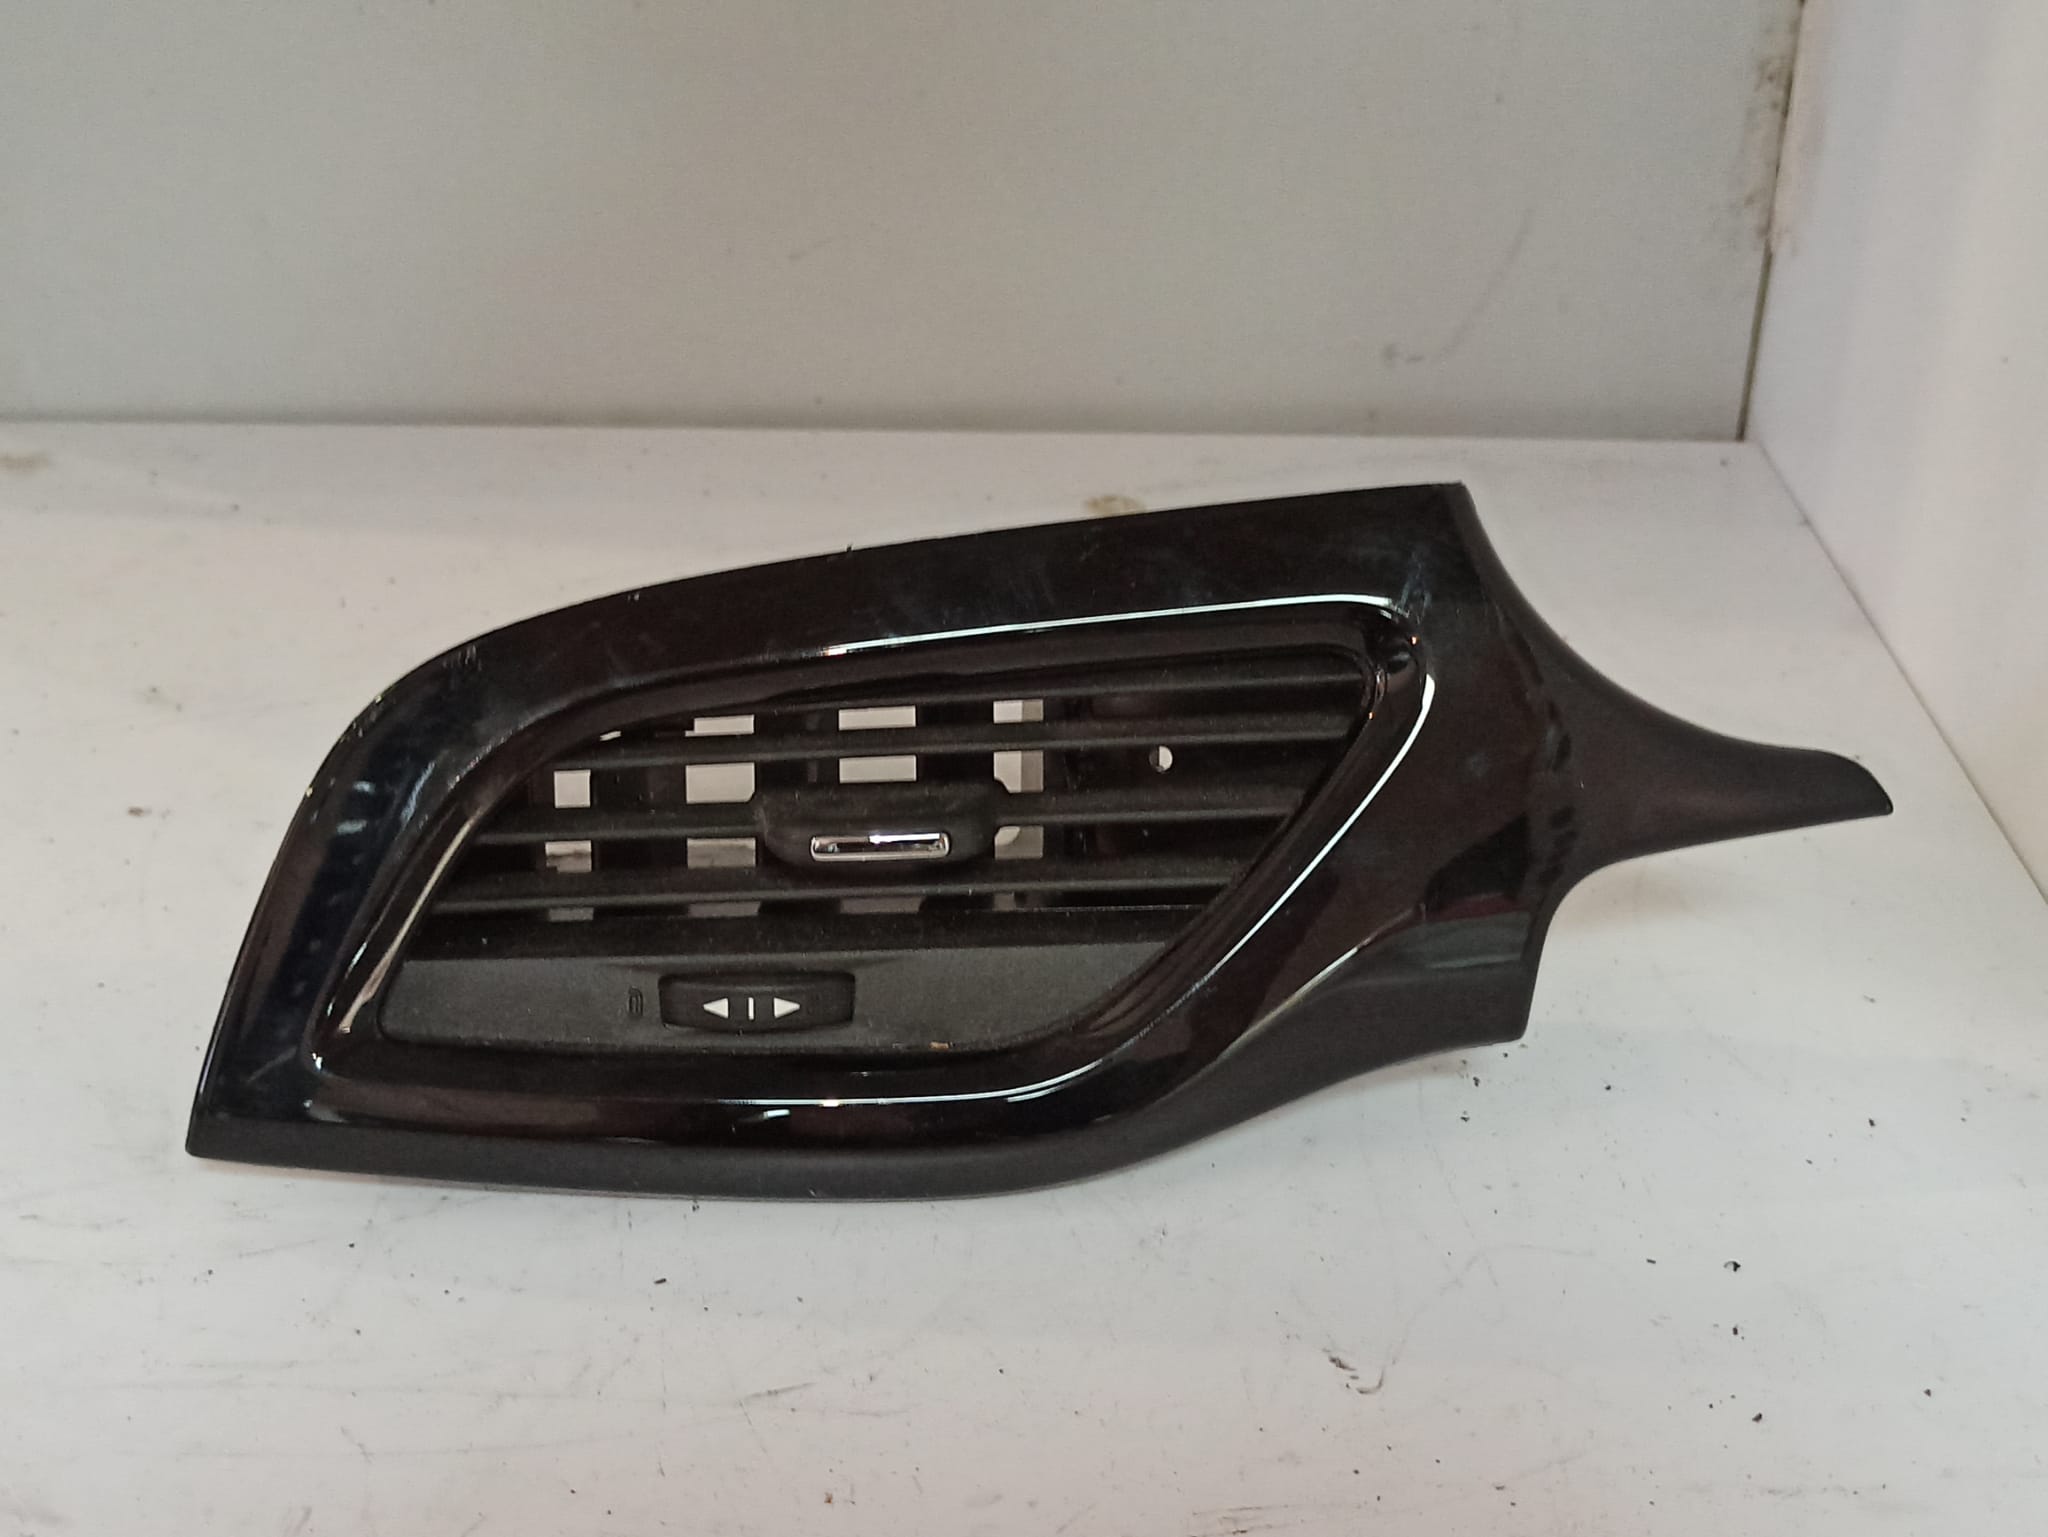 OPEL Corsa D (2006-2020) Cabin Air Intake Grille 13384931 24053818